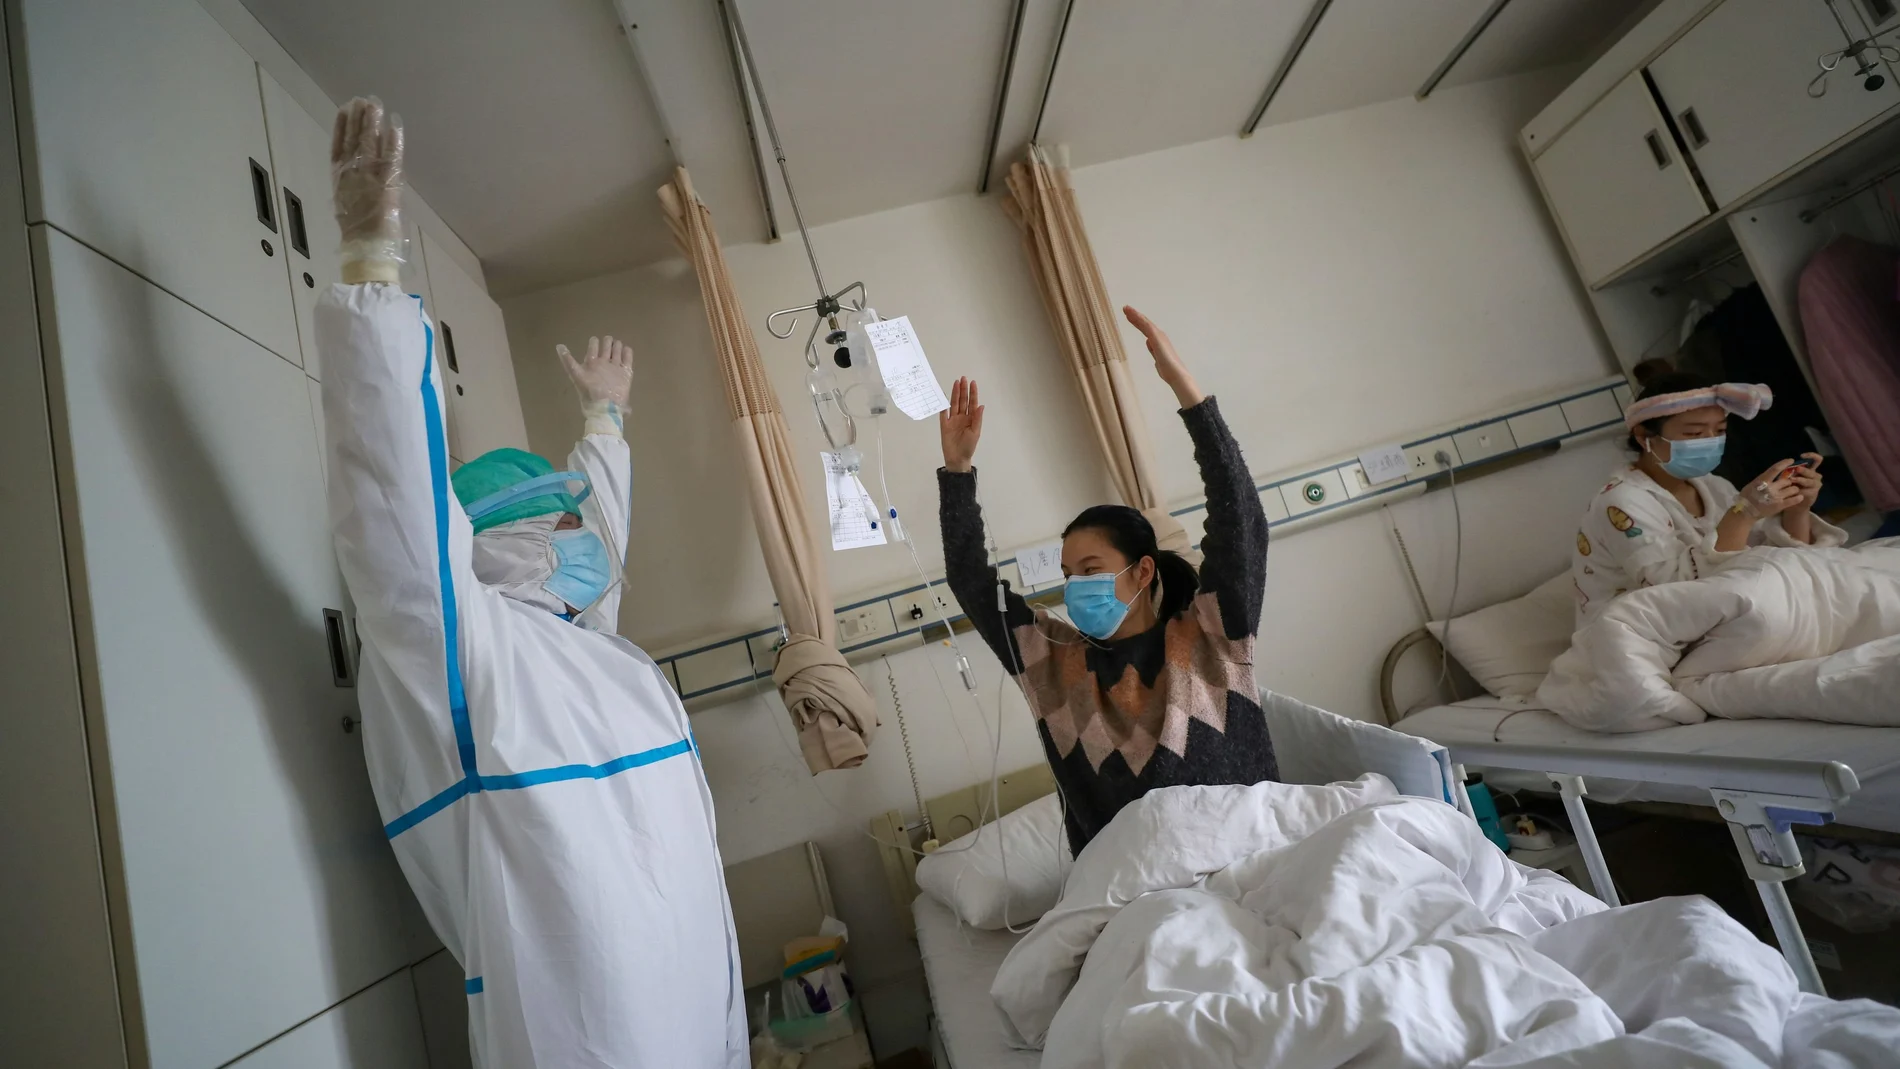 Medical worker in a protective suit shows a patient gestures of an exercise for rehabilitation at a ward of Wuhan Red Cross Hospital in Wuhan